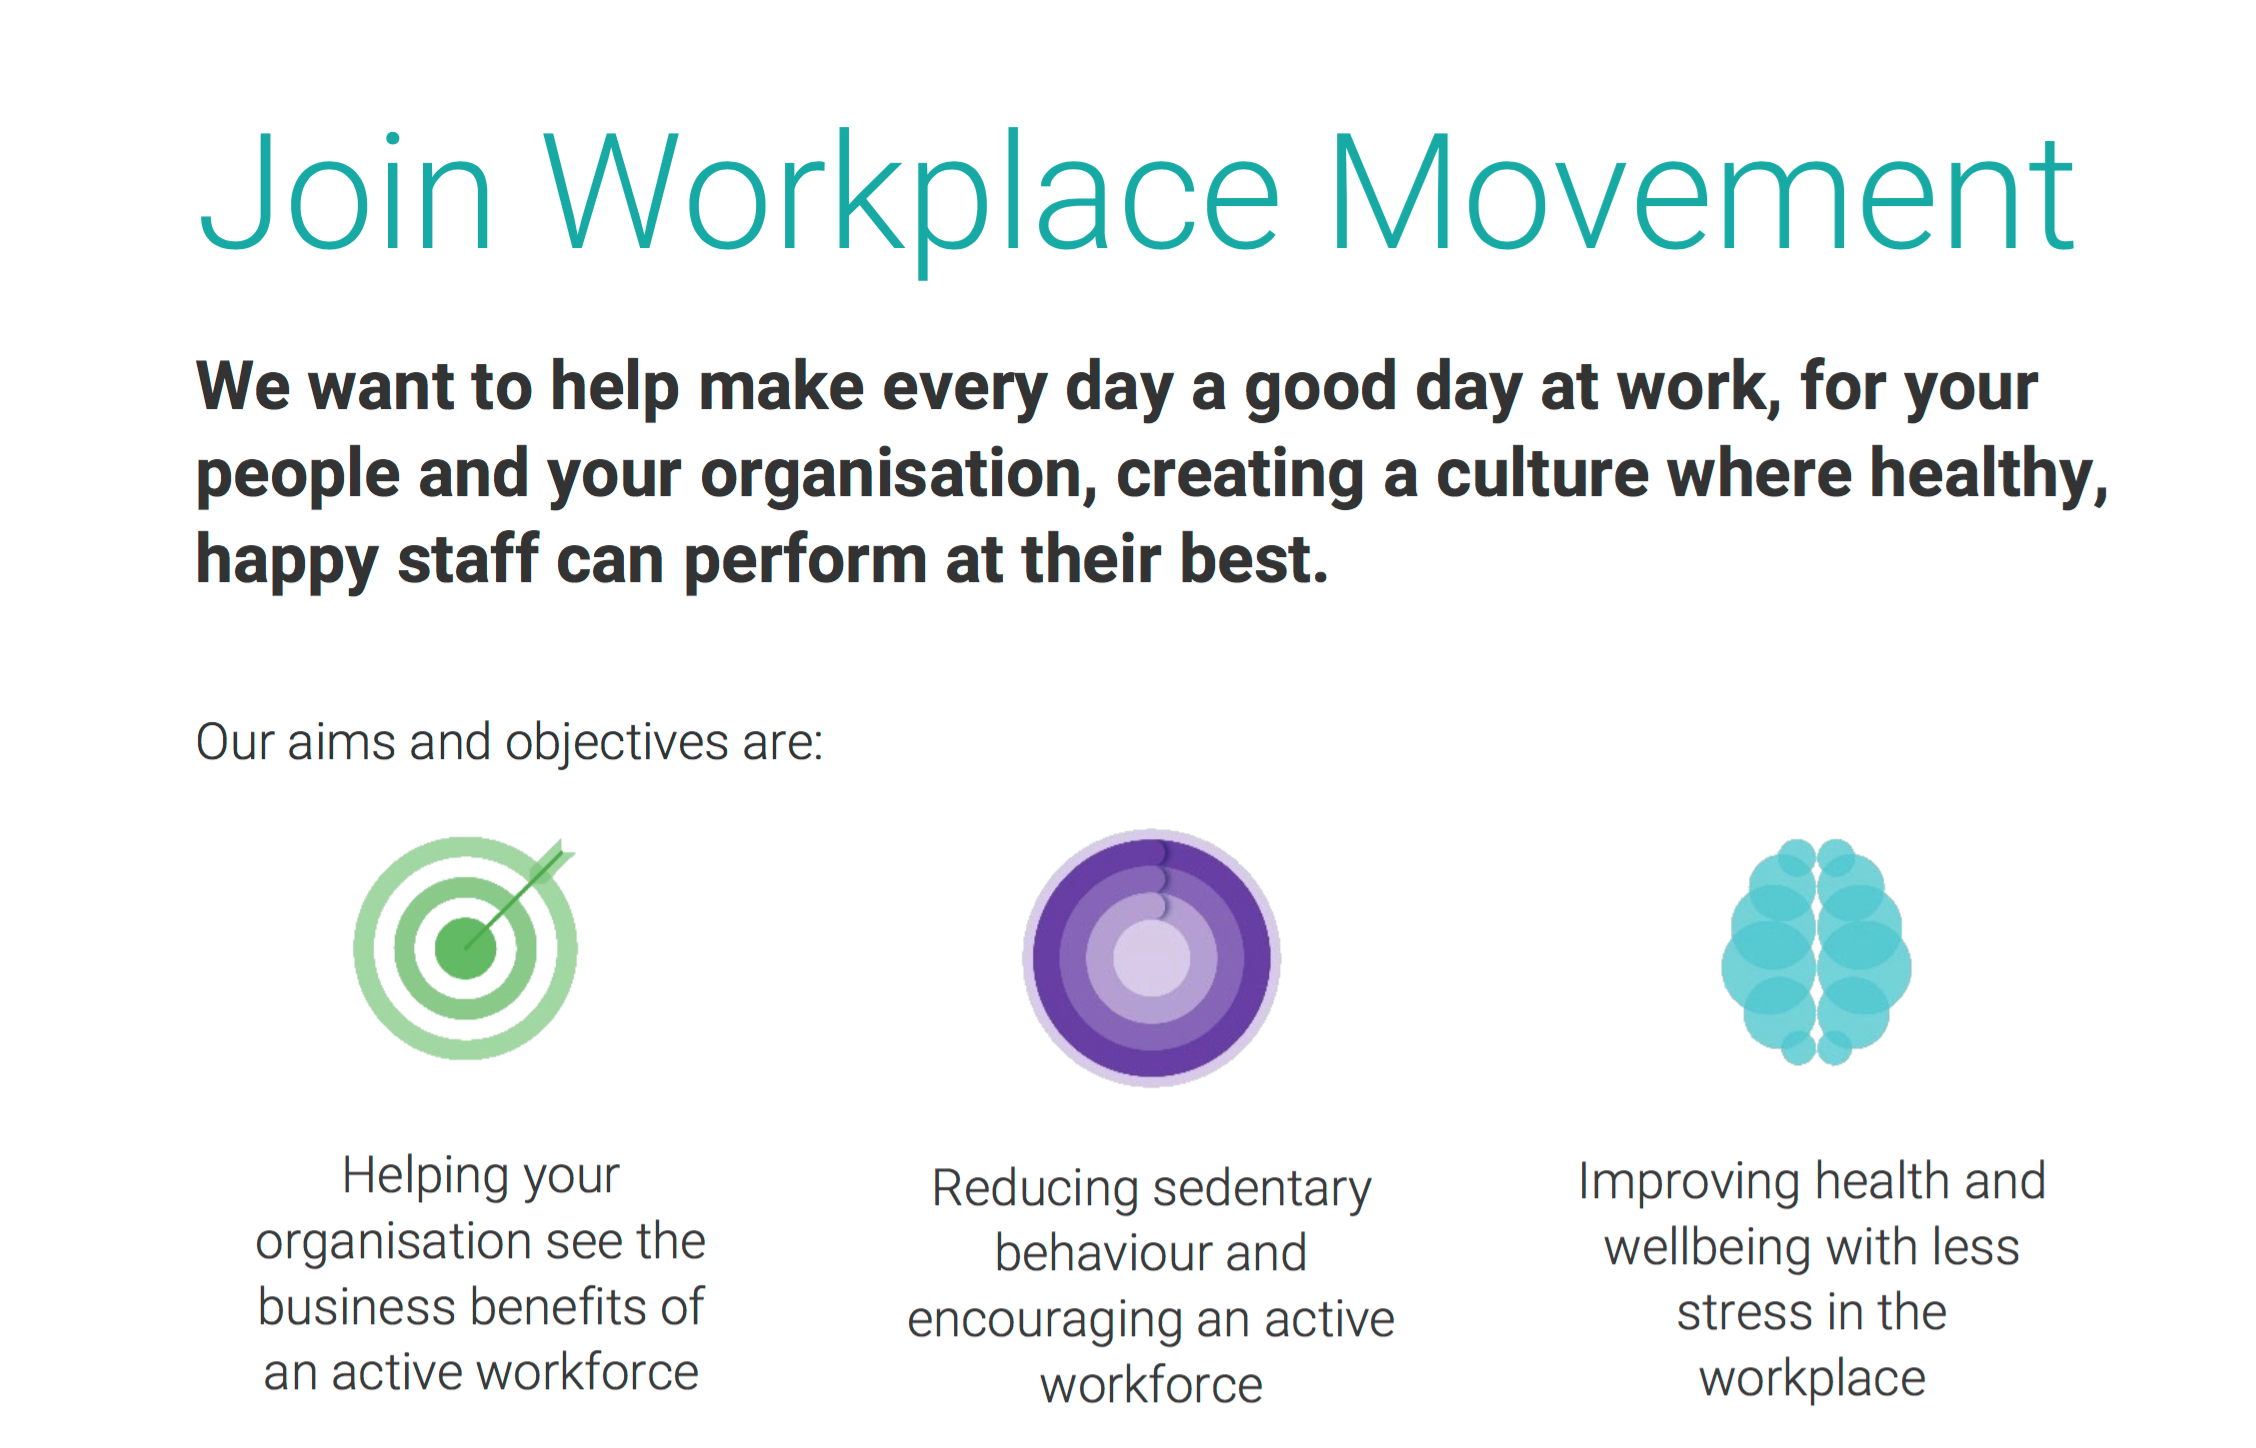 We want to help make every day a good day at work, for your people and your organisation, creating a culture where healthy, happy staff can perform at their best.